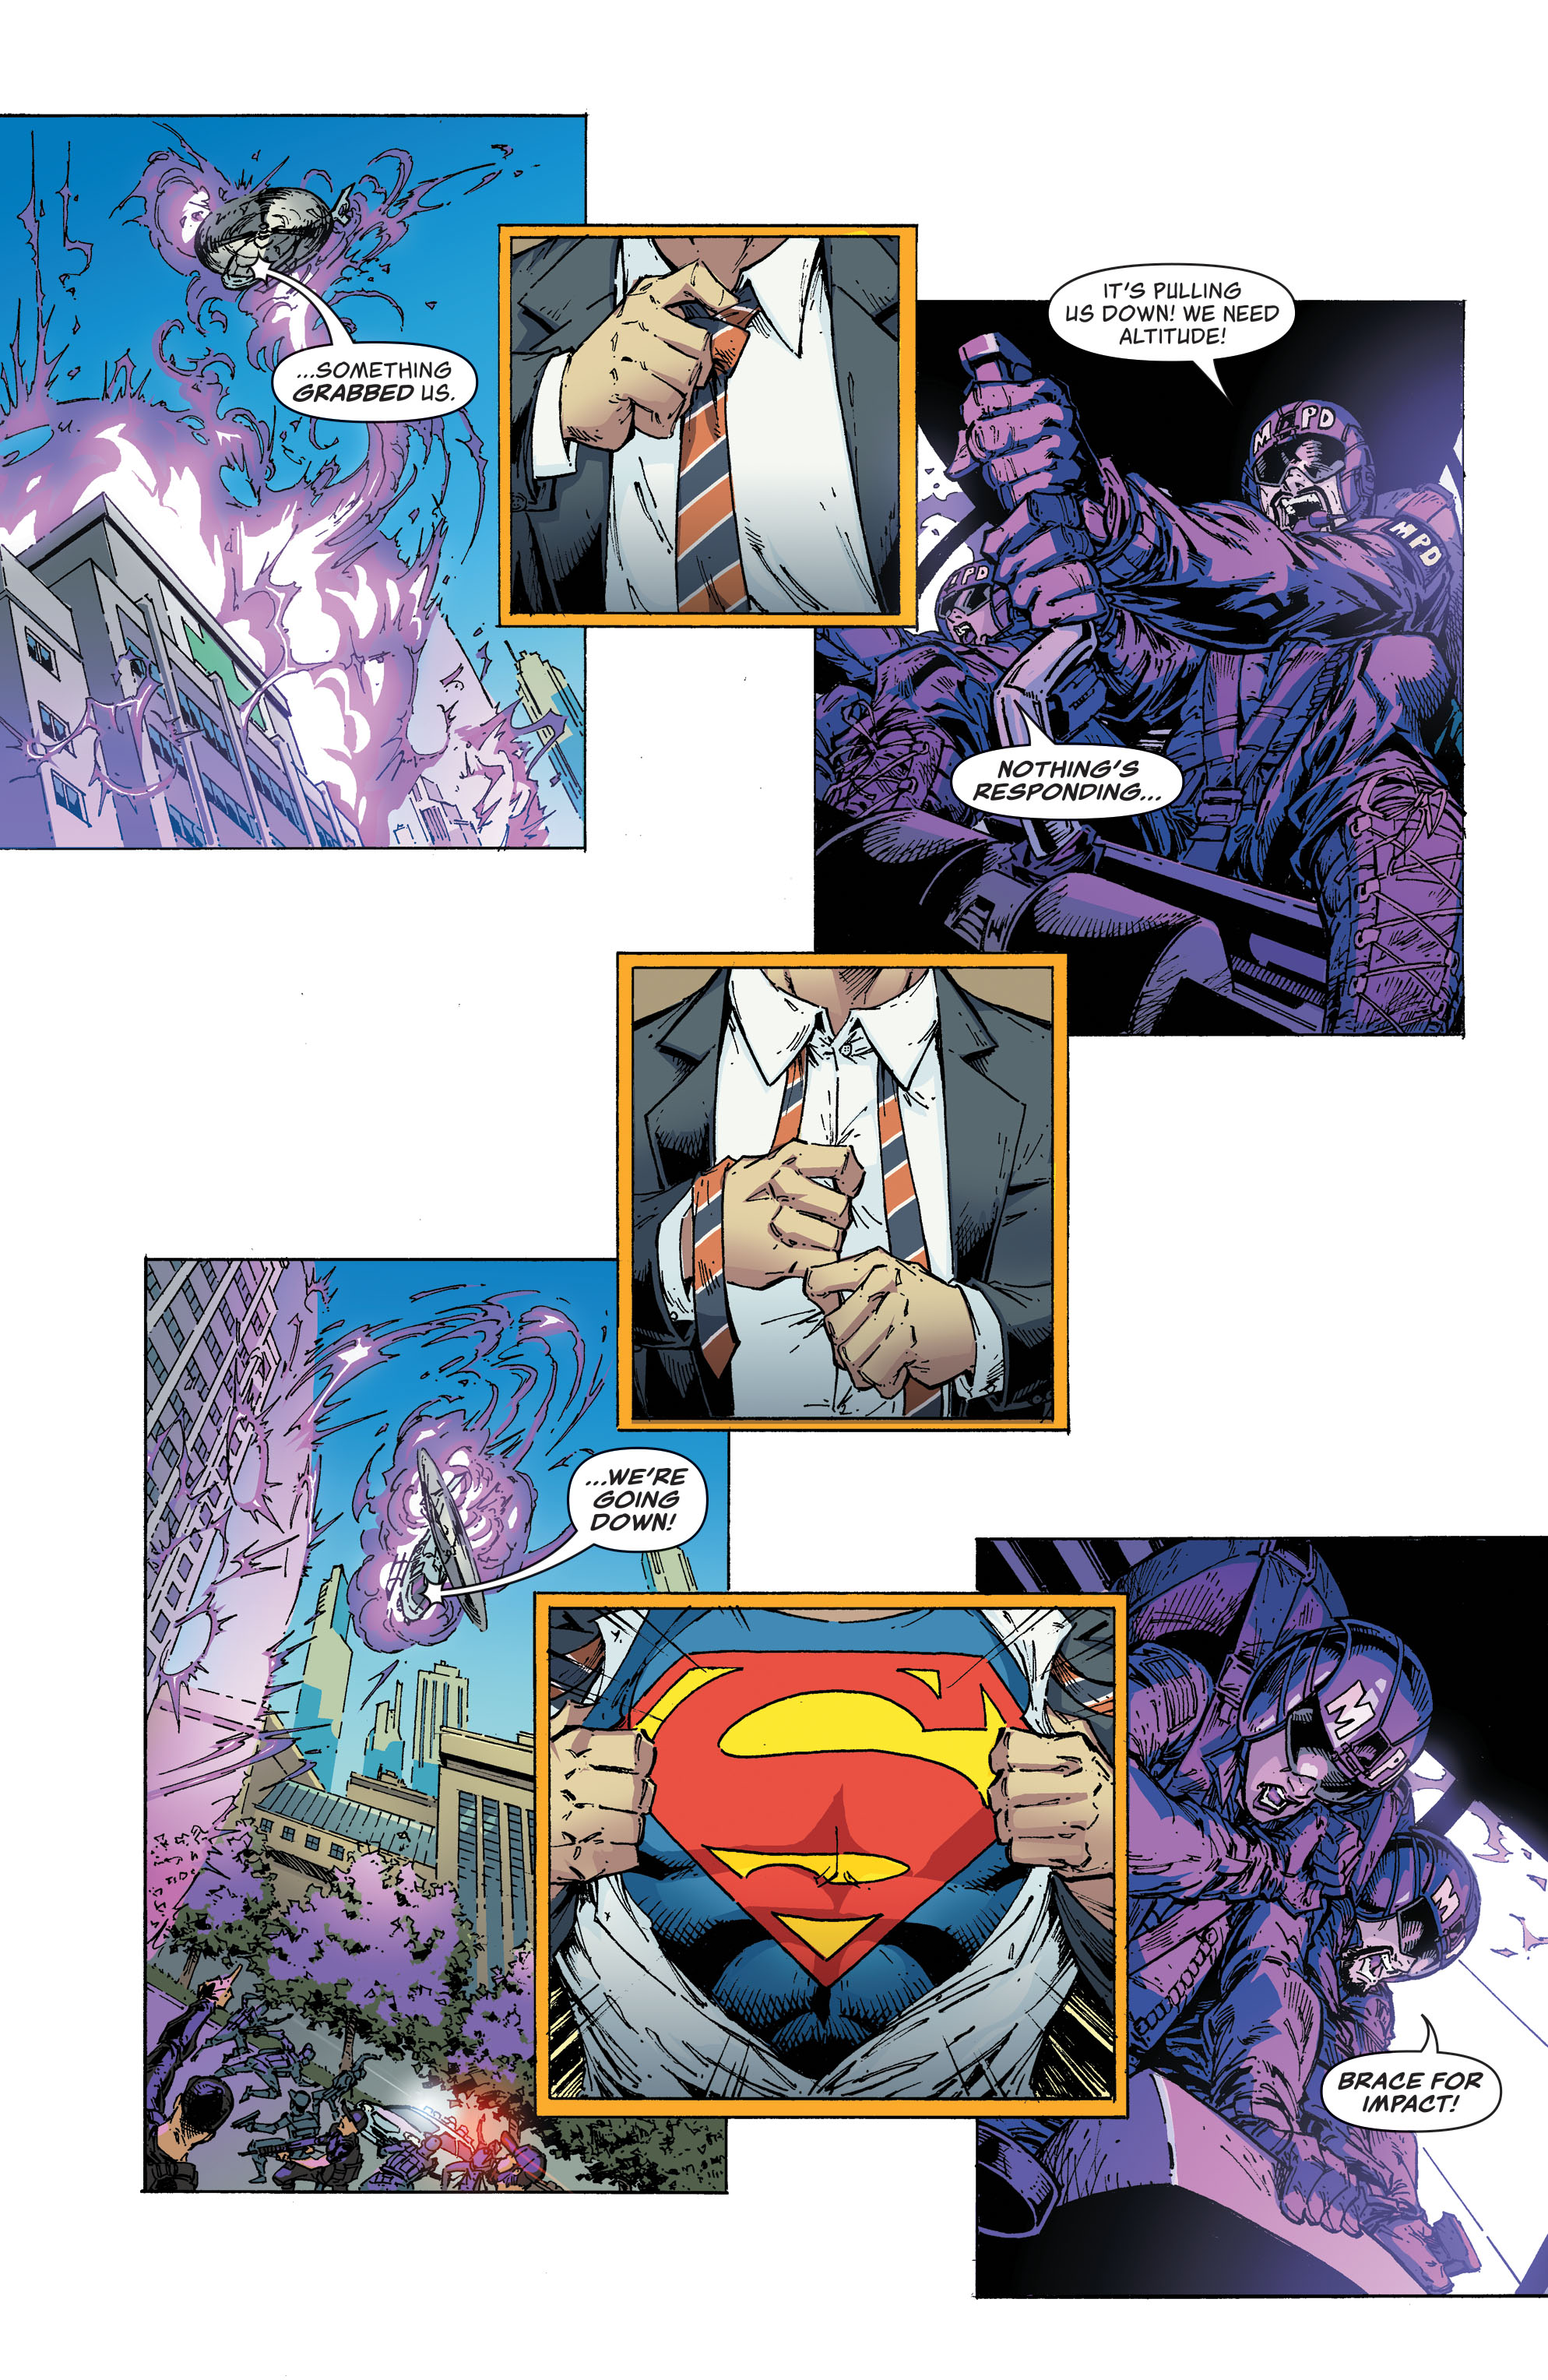 Superman: Man of Tomorrow (2020-): Chapter 17 - Page 3